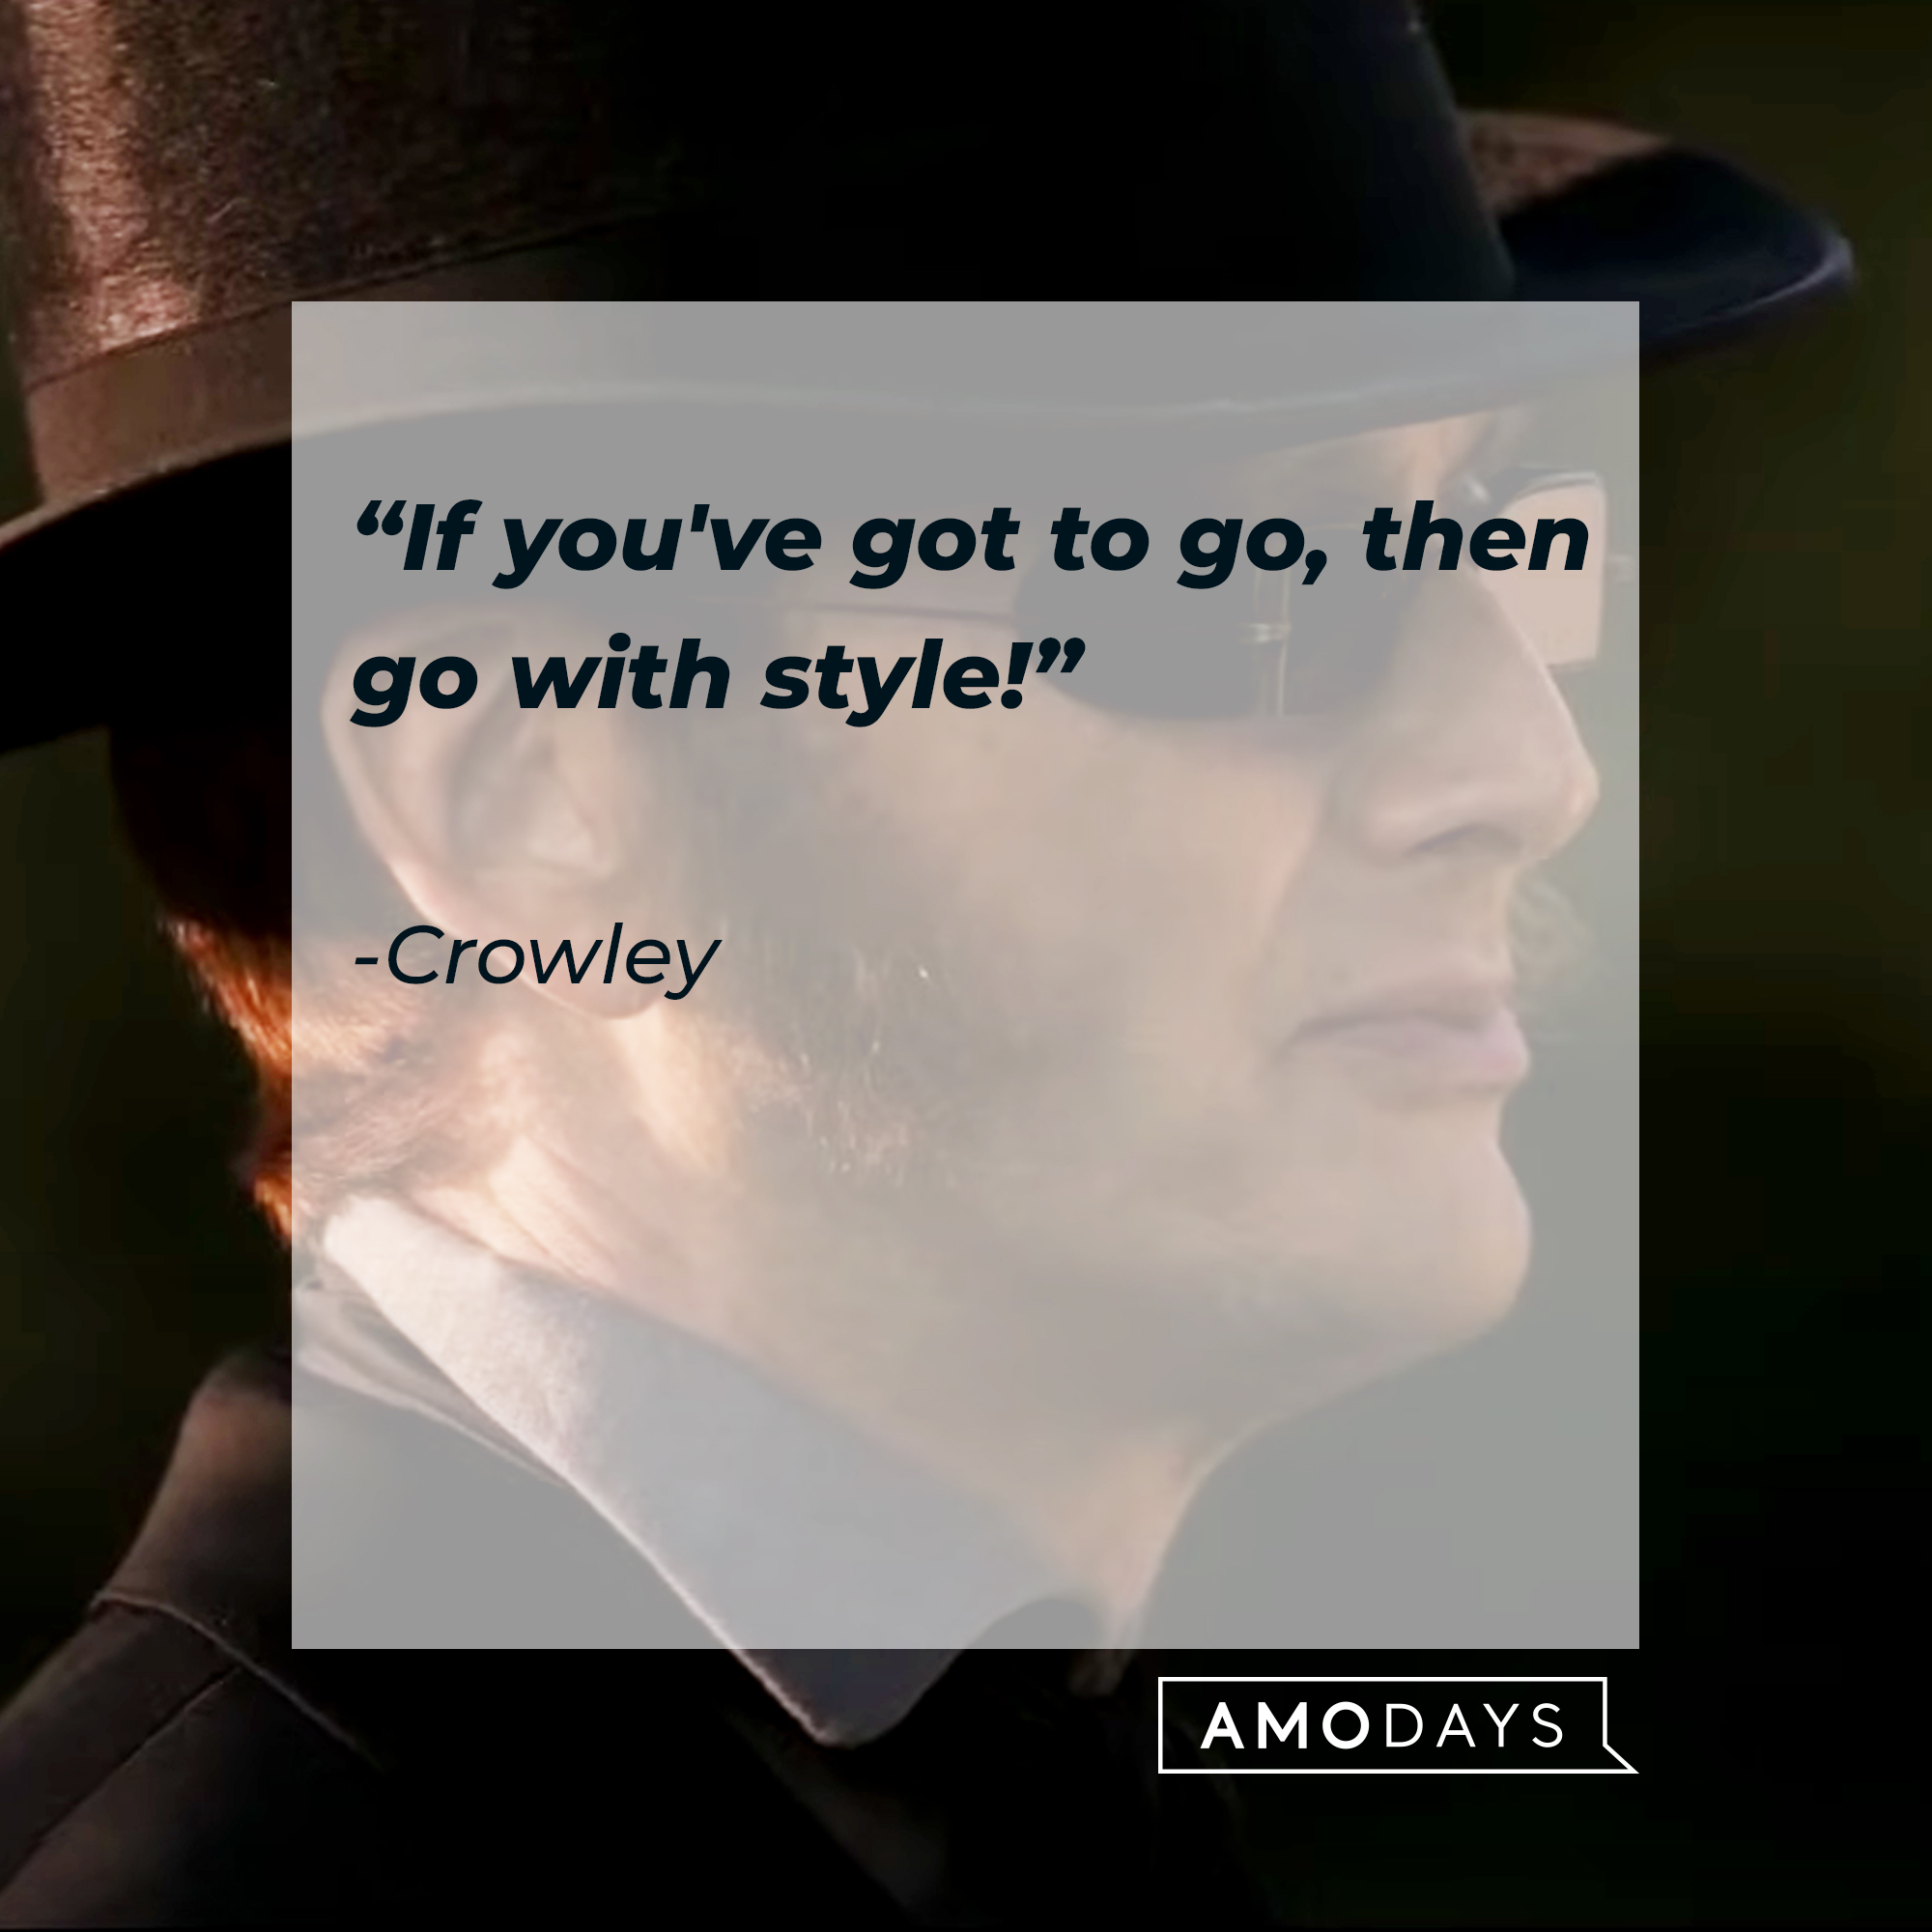 Crowley's quote: "If you've got to go, then go with style!" | Source: Facebook.com/goodomensprime